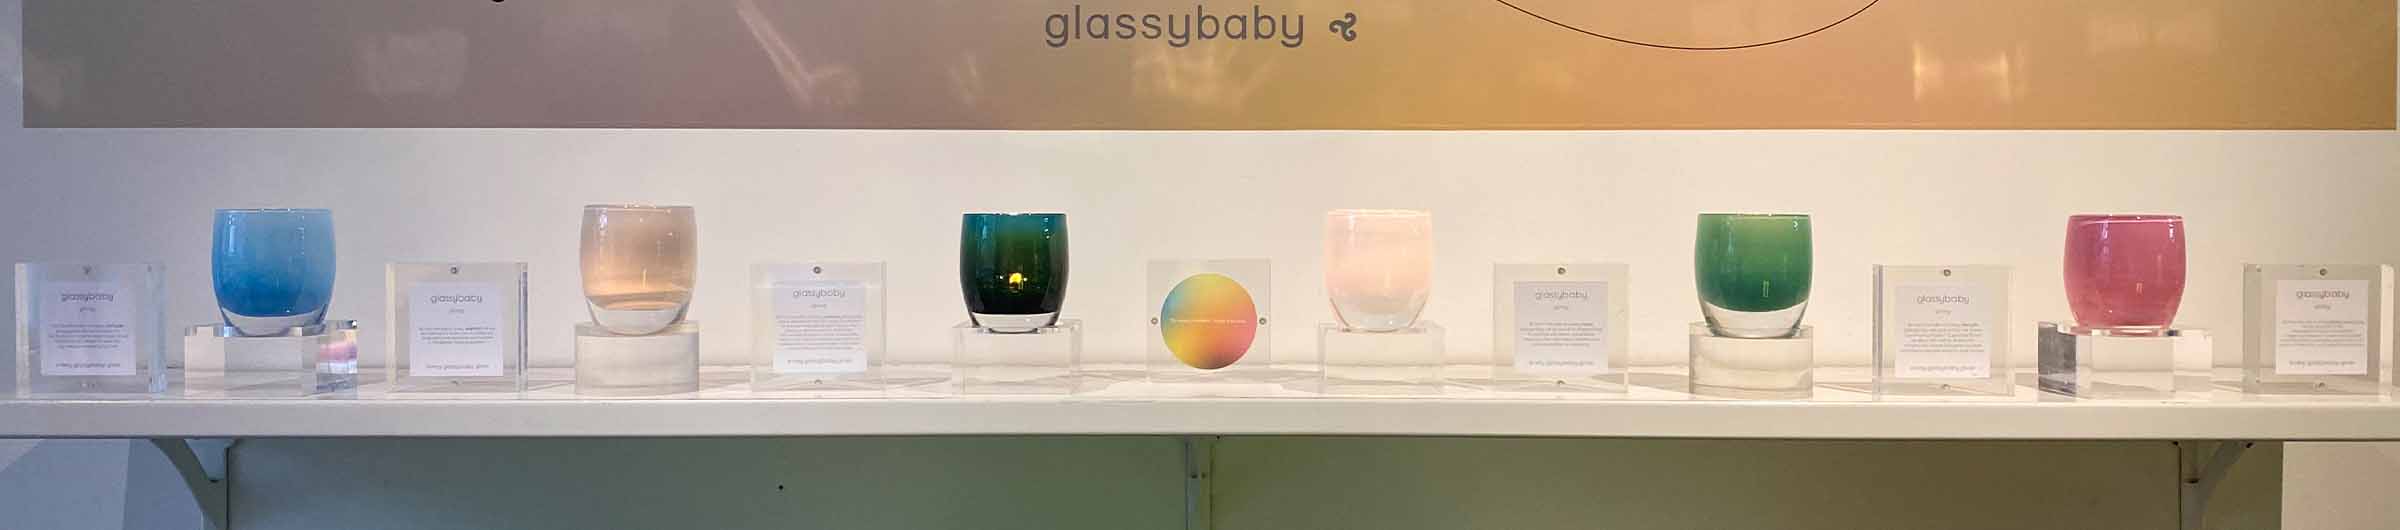 giving wall collection in store on shelf with descriptive plaques, a collection of hand-blown glass votive candle holders.